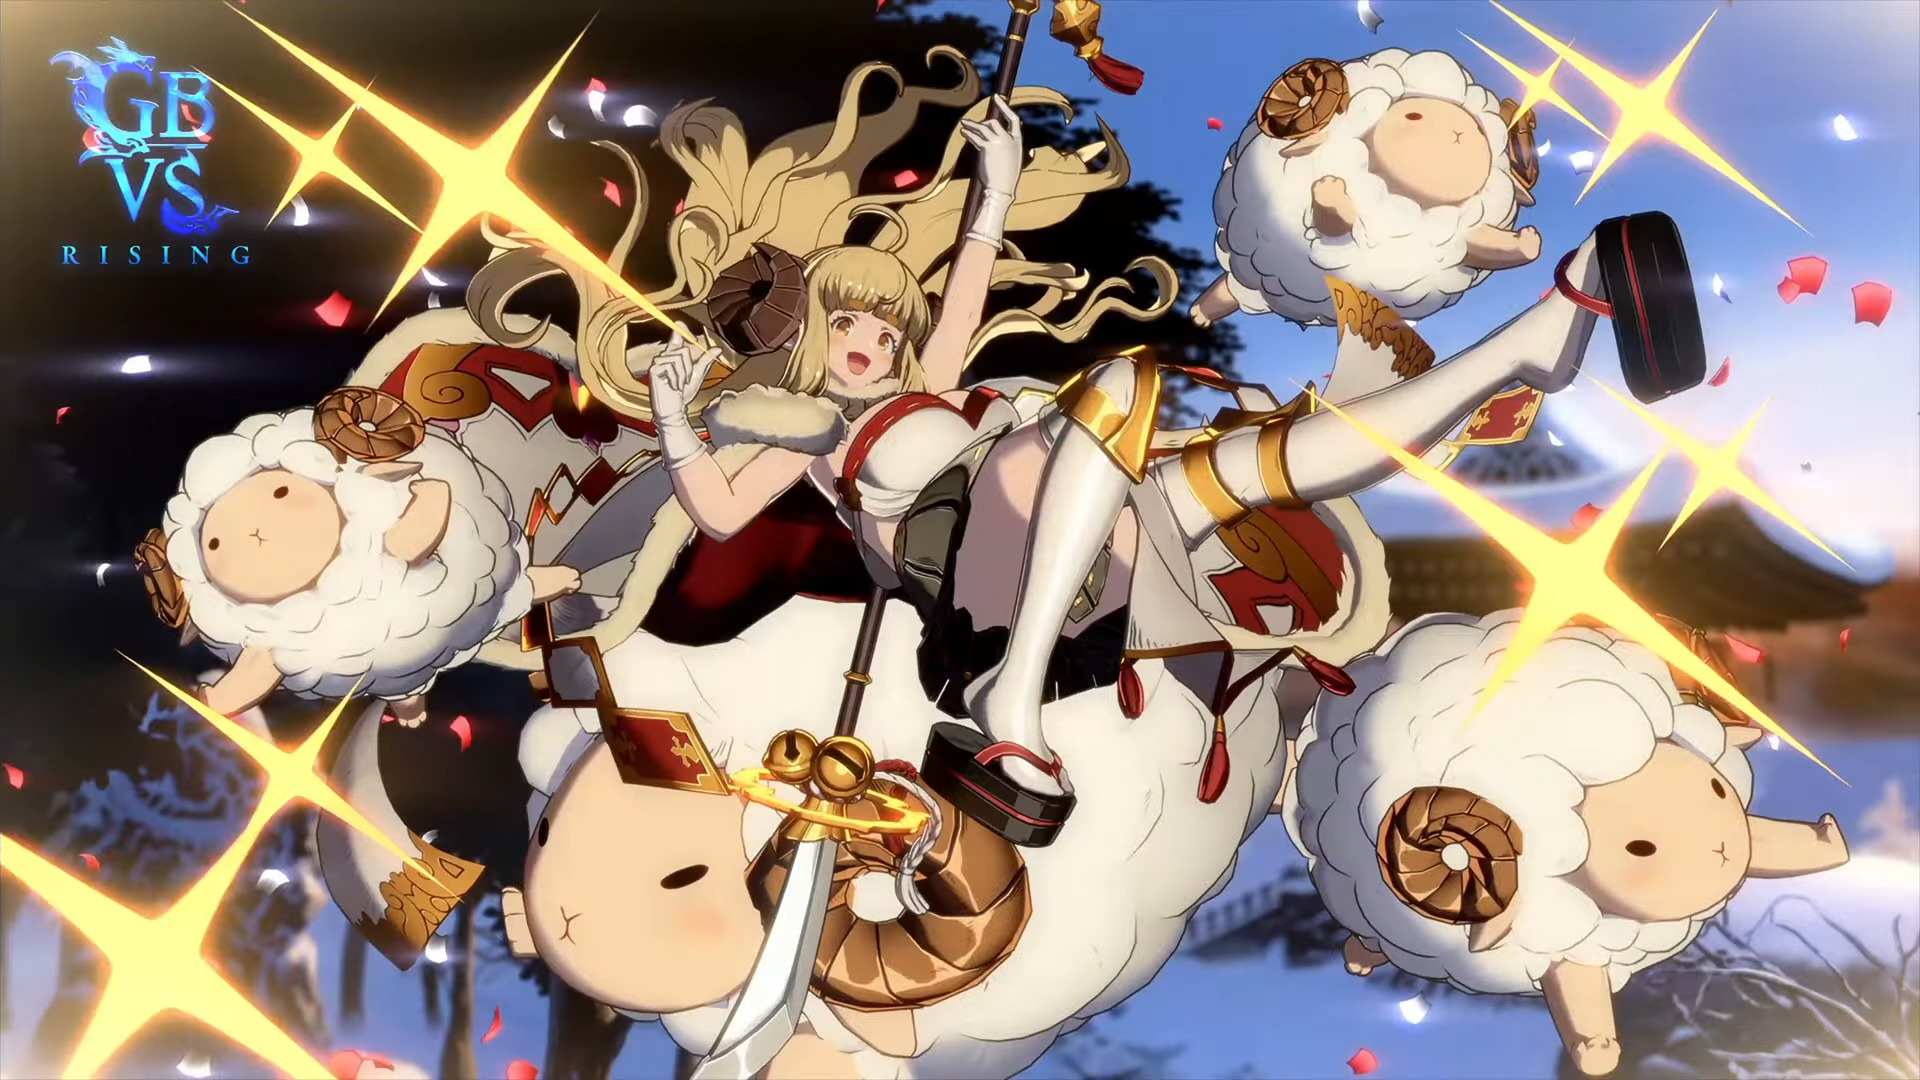 Granblue Fantasy Versus: Rising gets a beta test on PlayStation